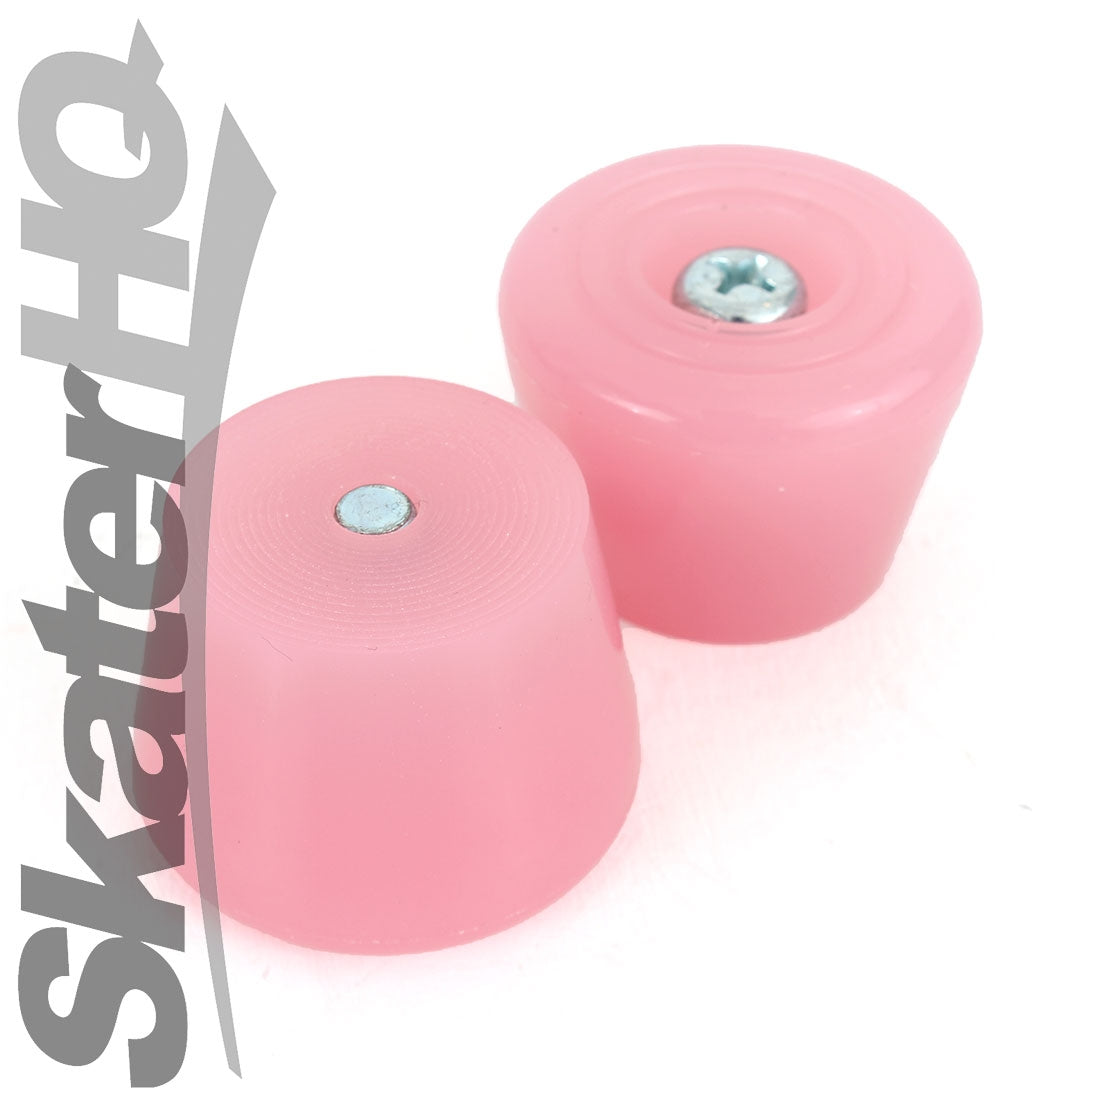 Impala Toe Stops 2pk - Clear Pink Roller Skate Hardware and Parts